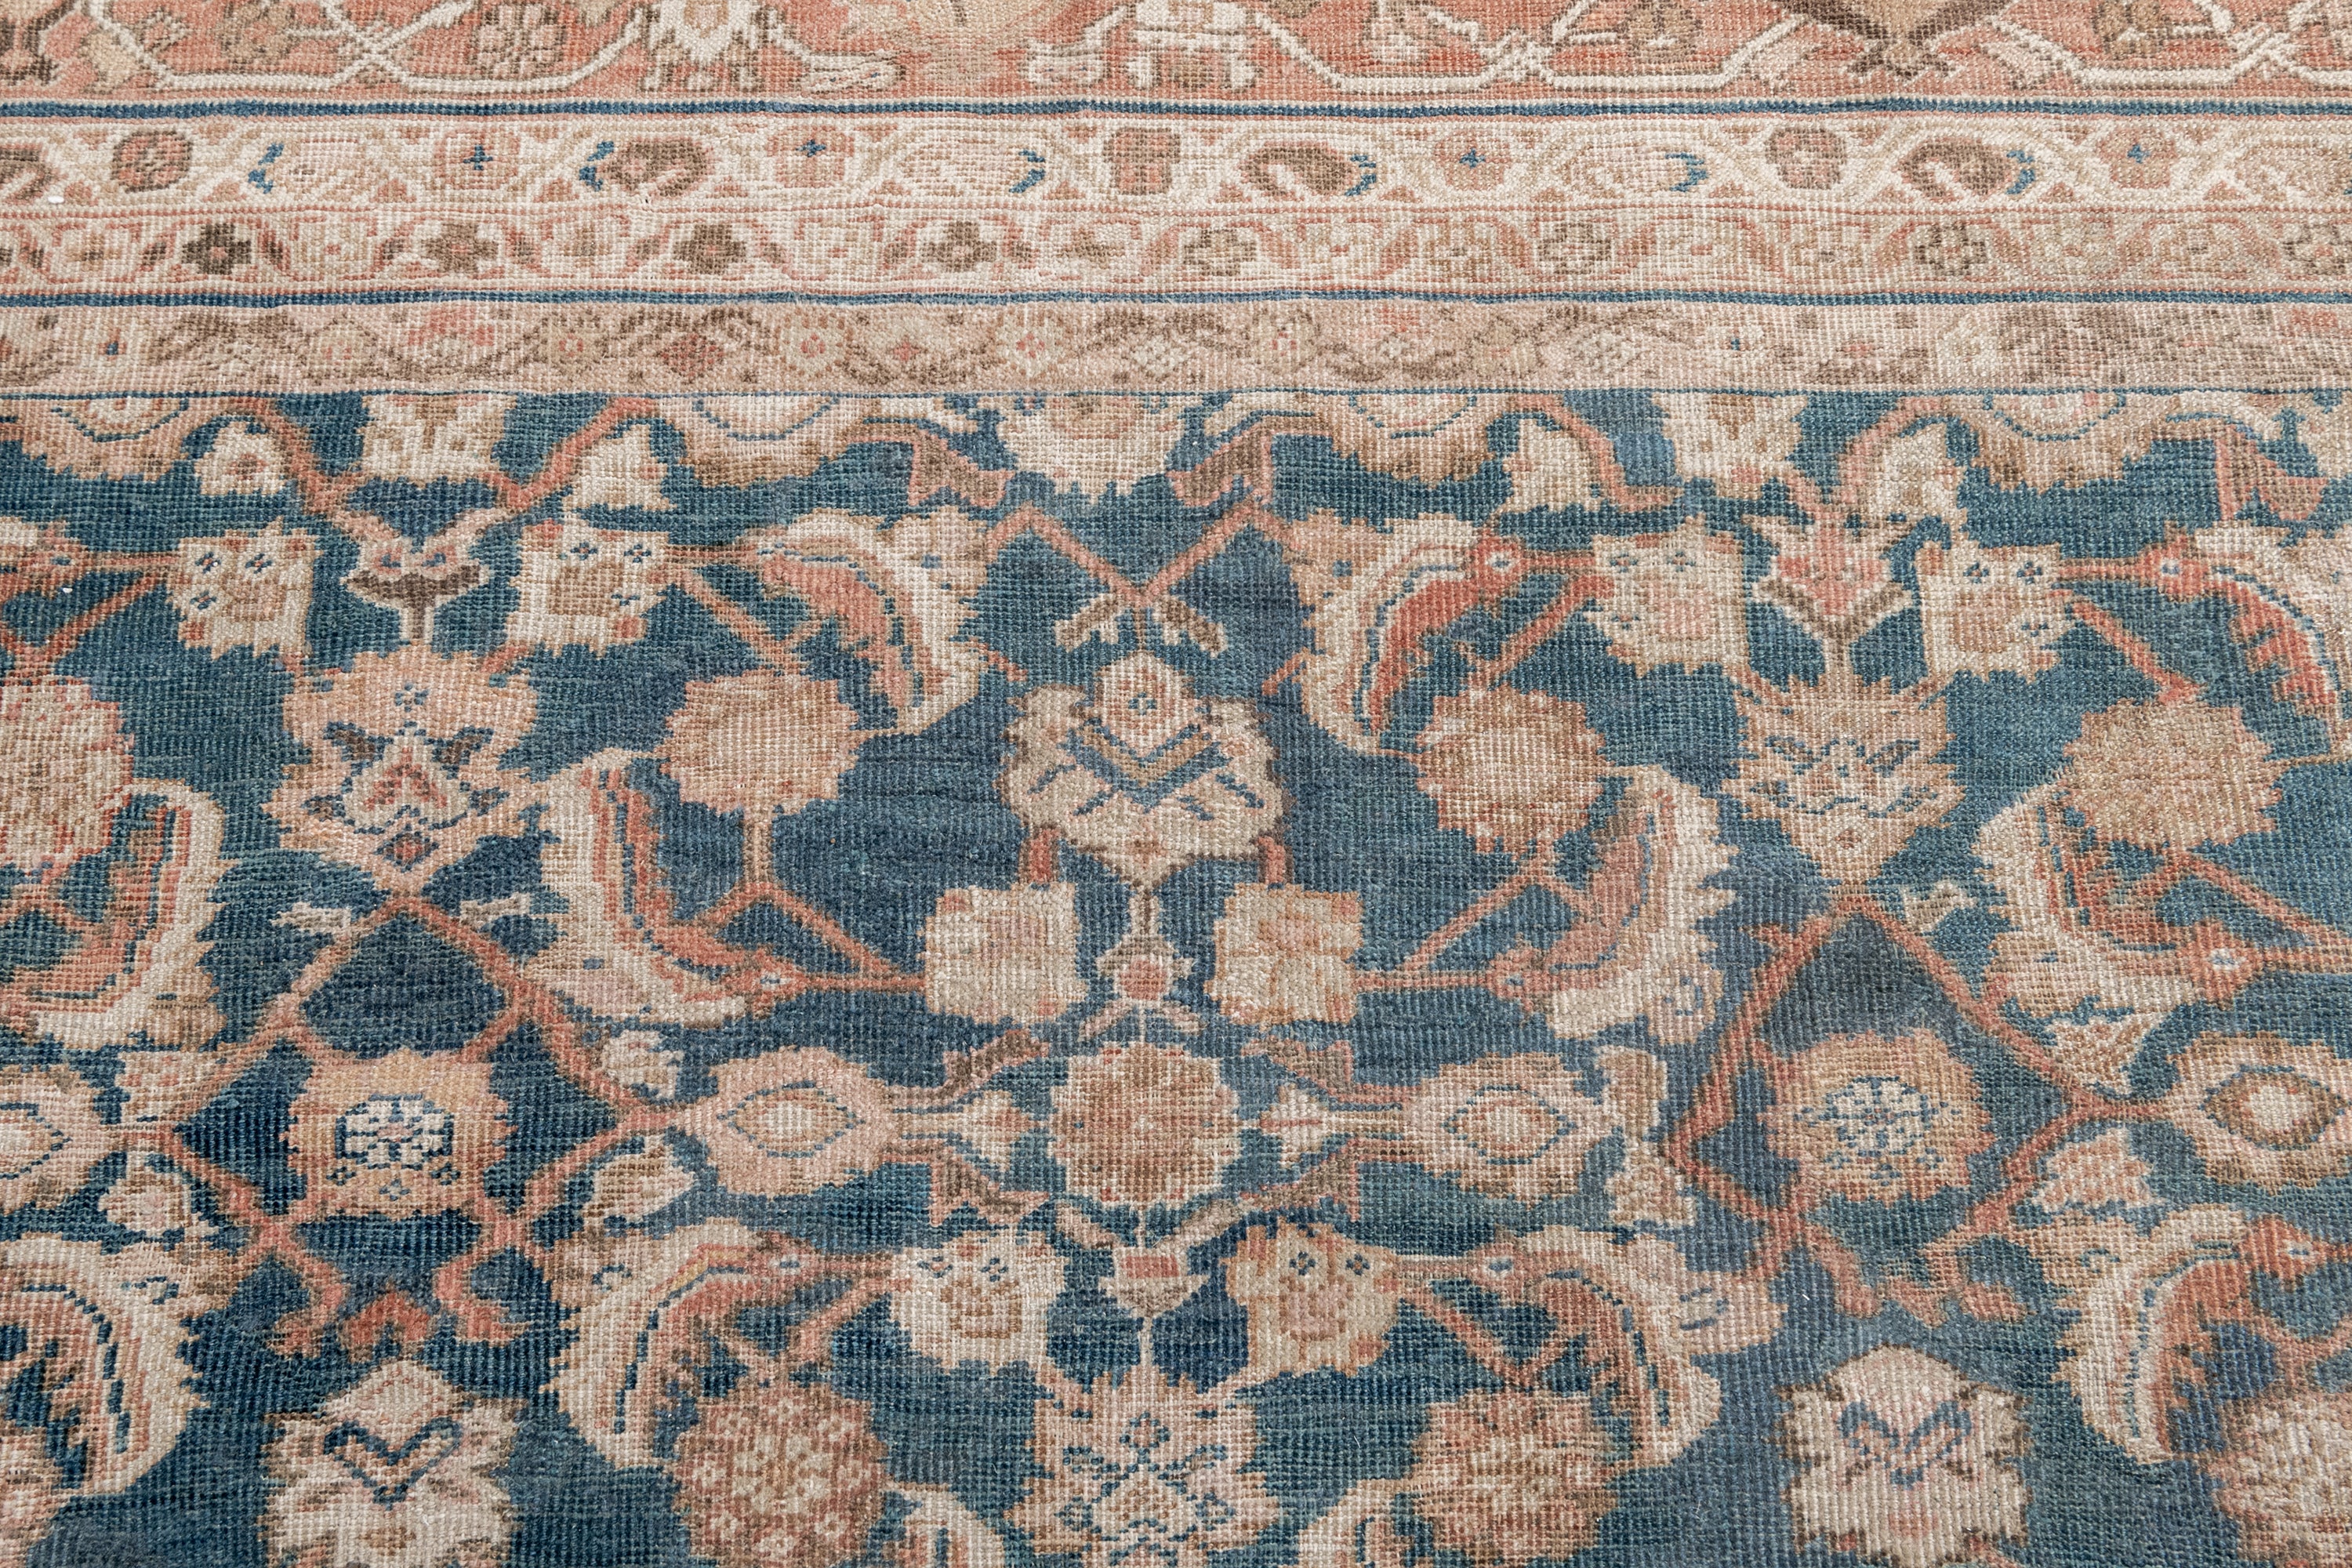 SULTANABAD RUG, AR31070/7256, WEST PERSIA, 13'2" X 16'7" - thumbnail 4